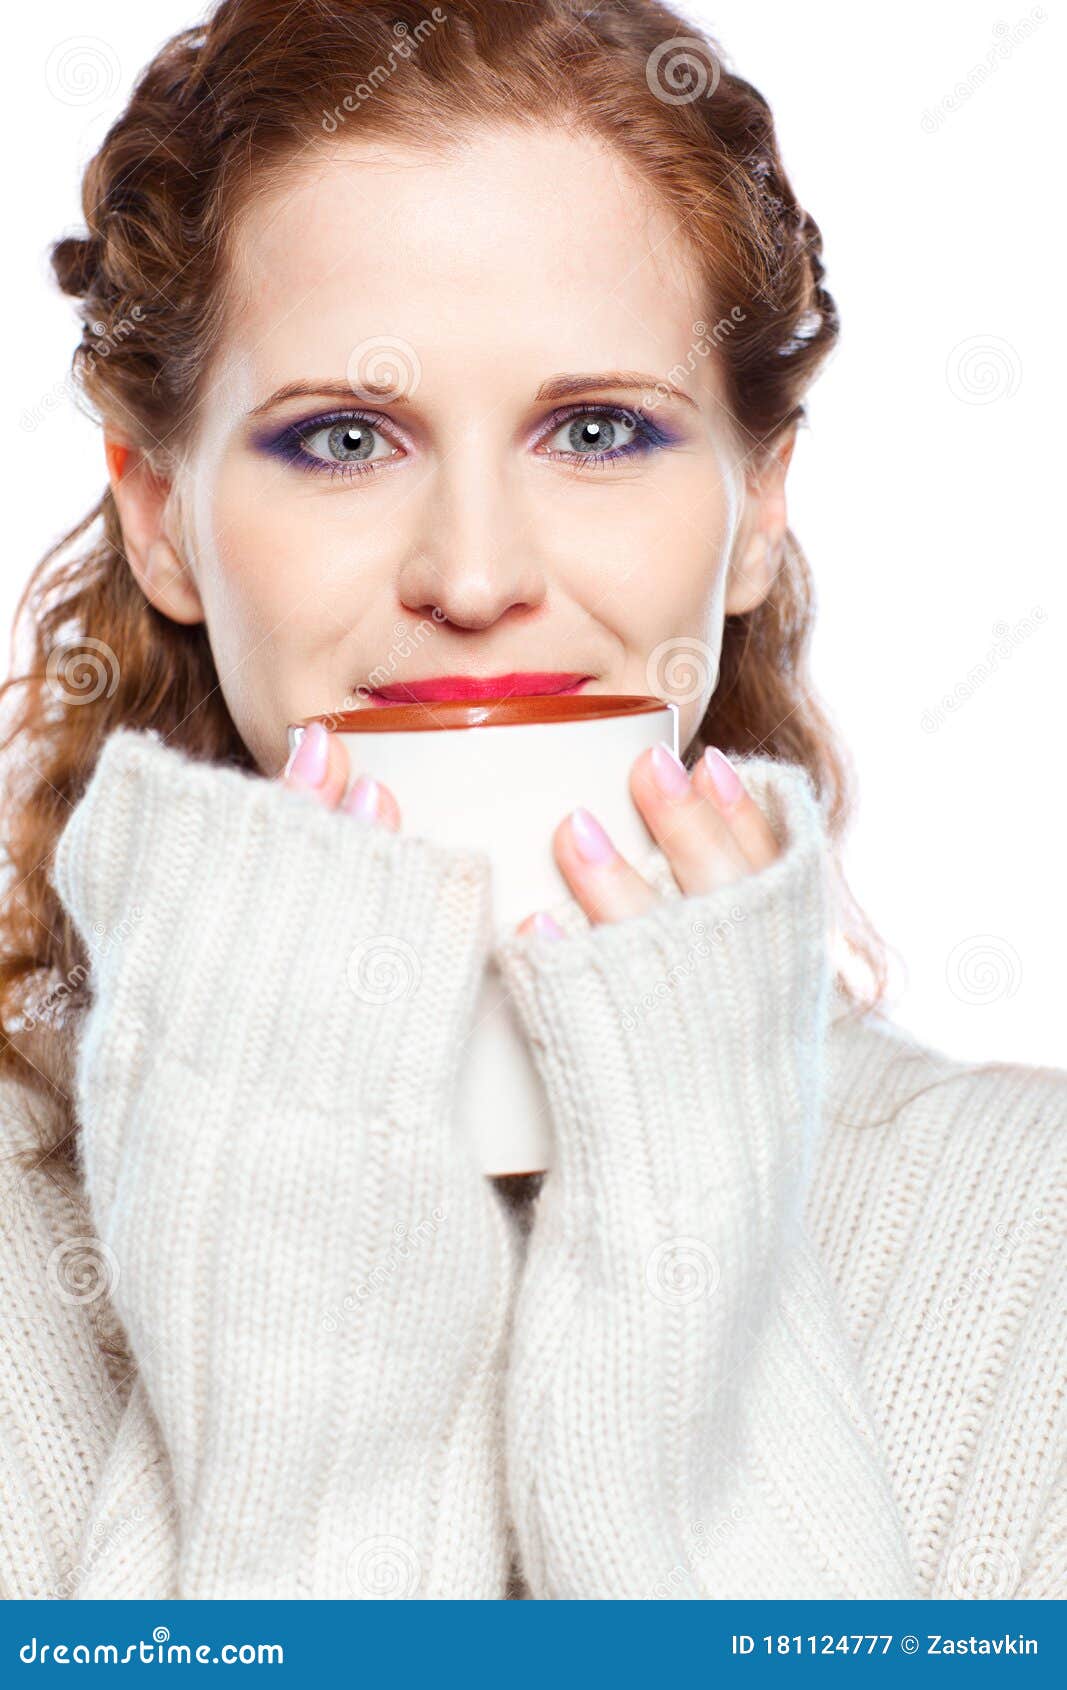 Beautiful Girl in a Cashmere Sweater with Cup of Coffee Stock Image ...